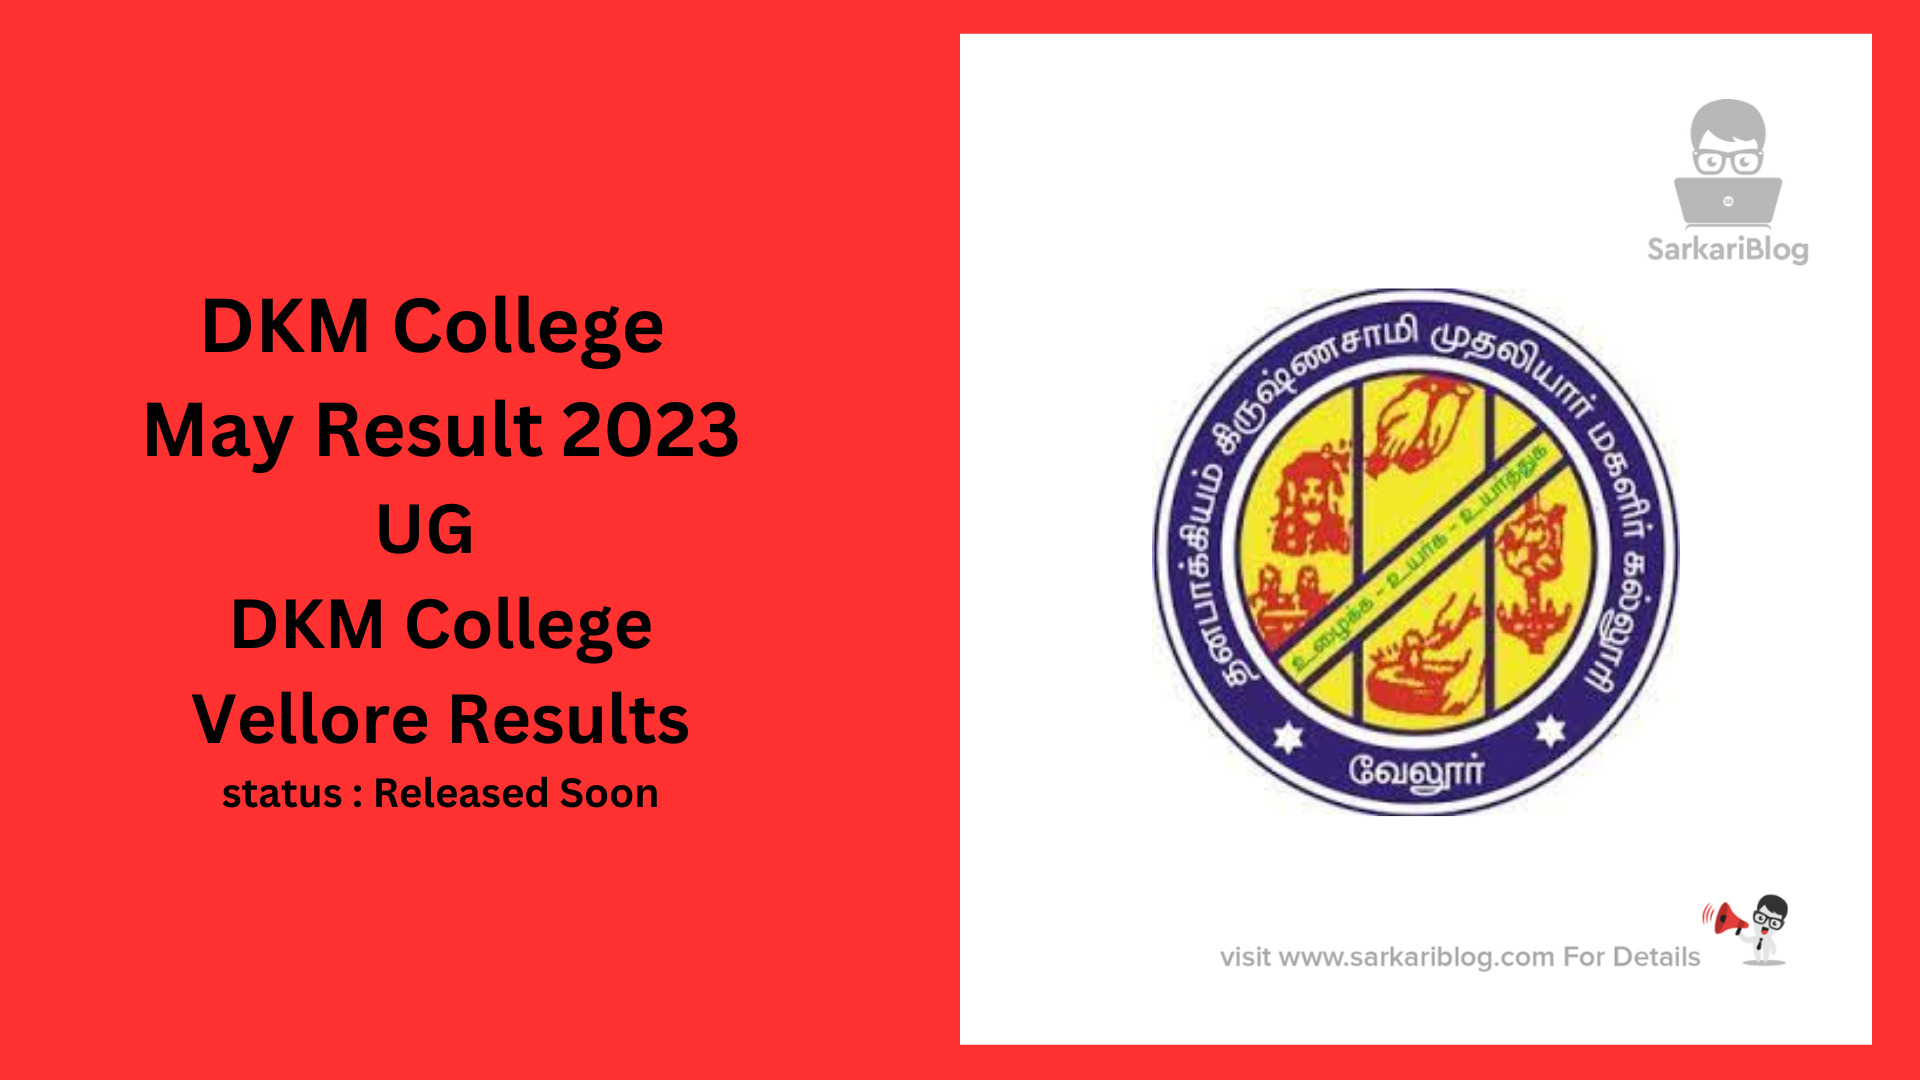 DKM College May Result 2023